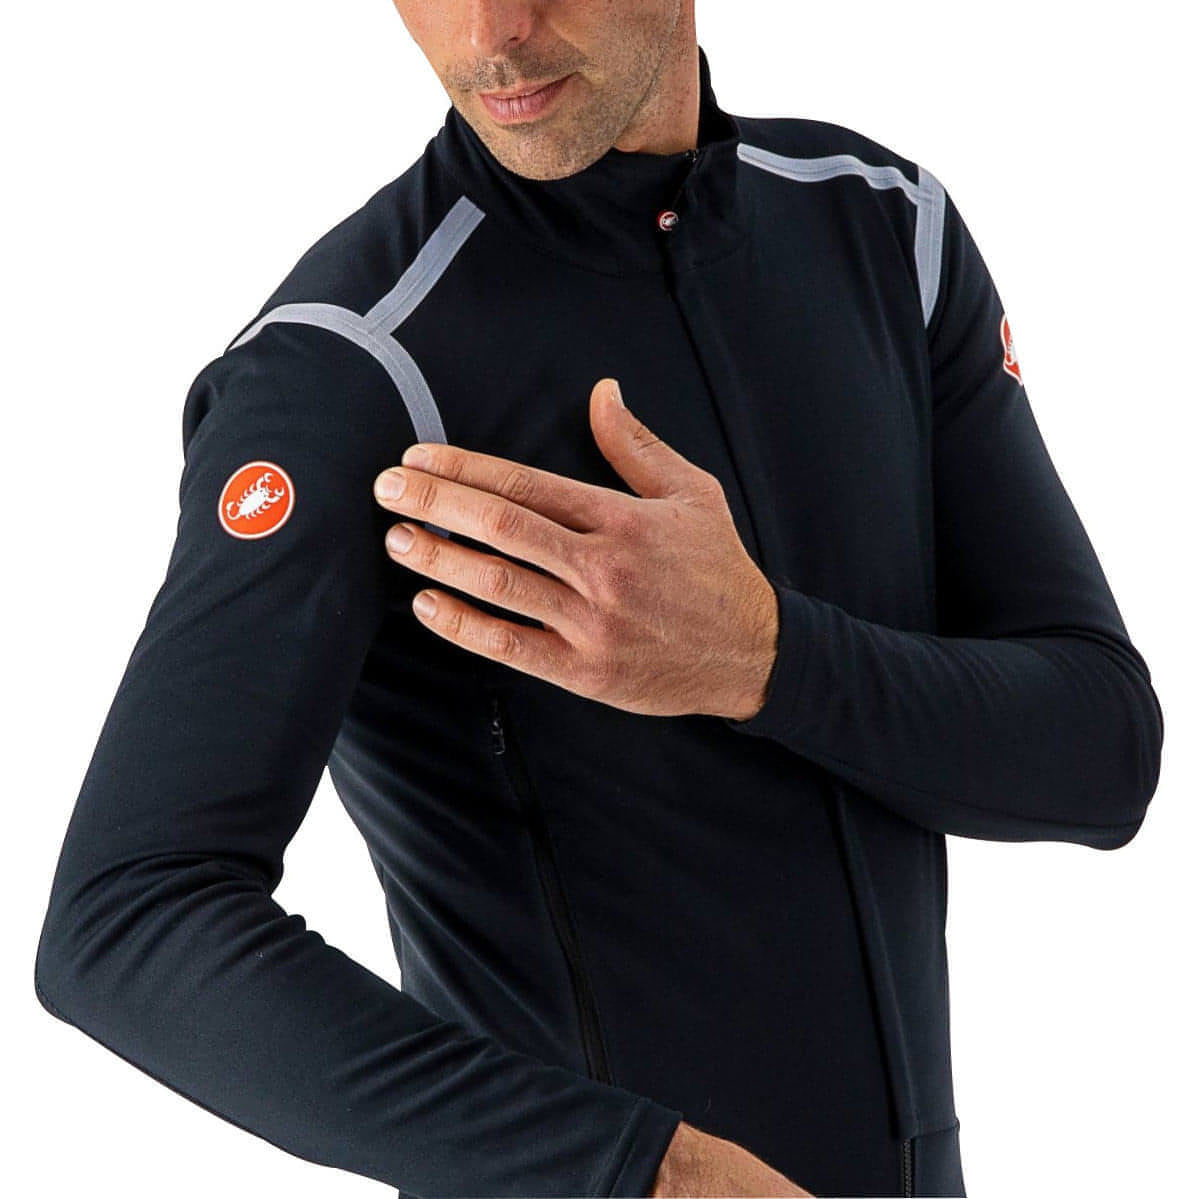 Castelli Perfetto Ros Long Sleeve Jersey Details